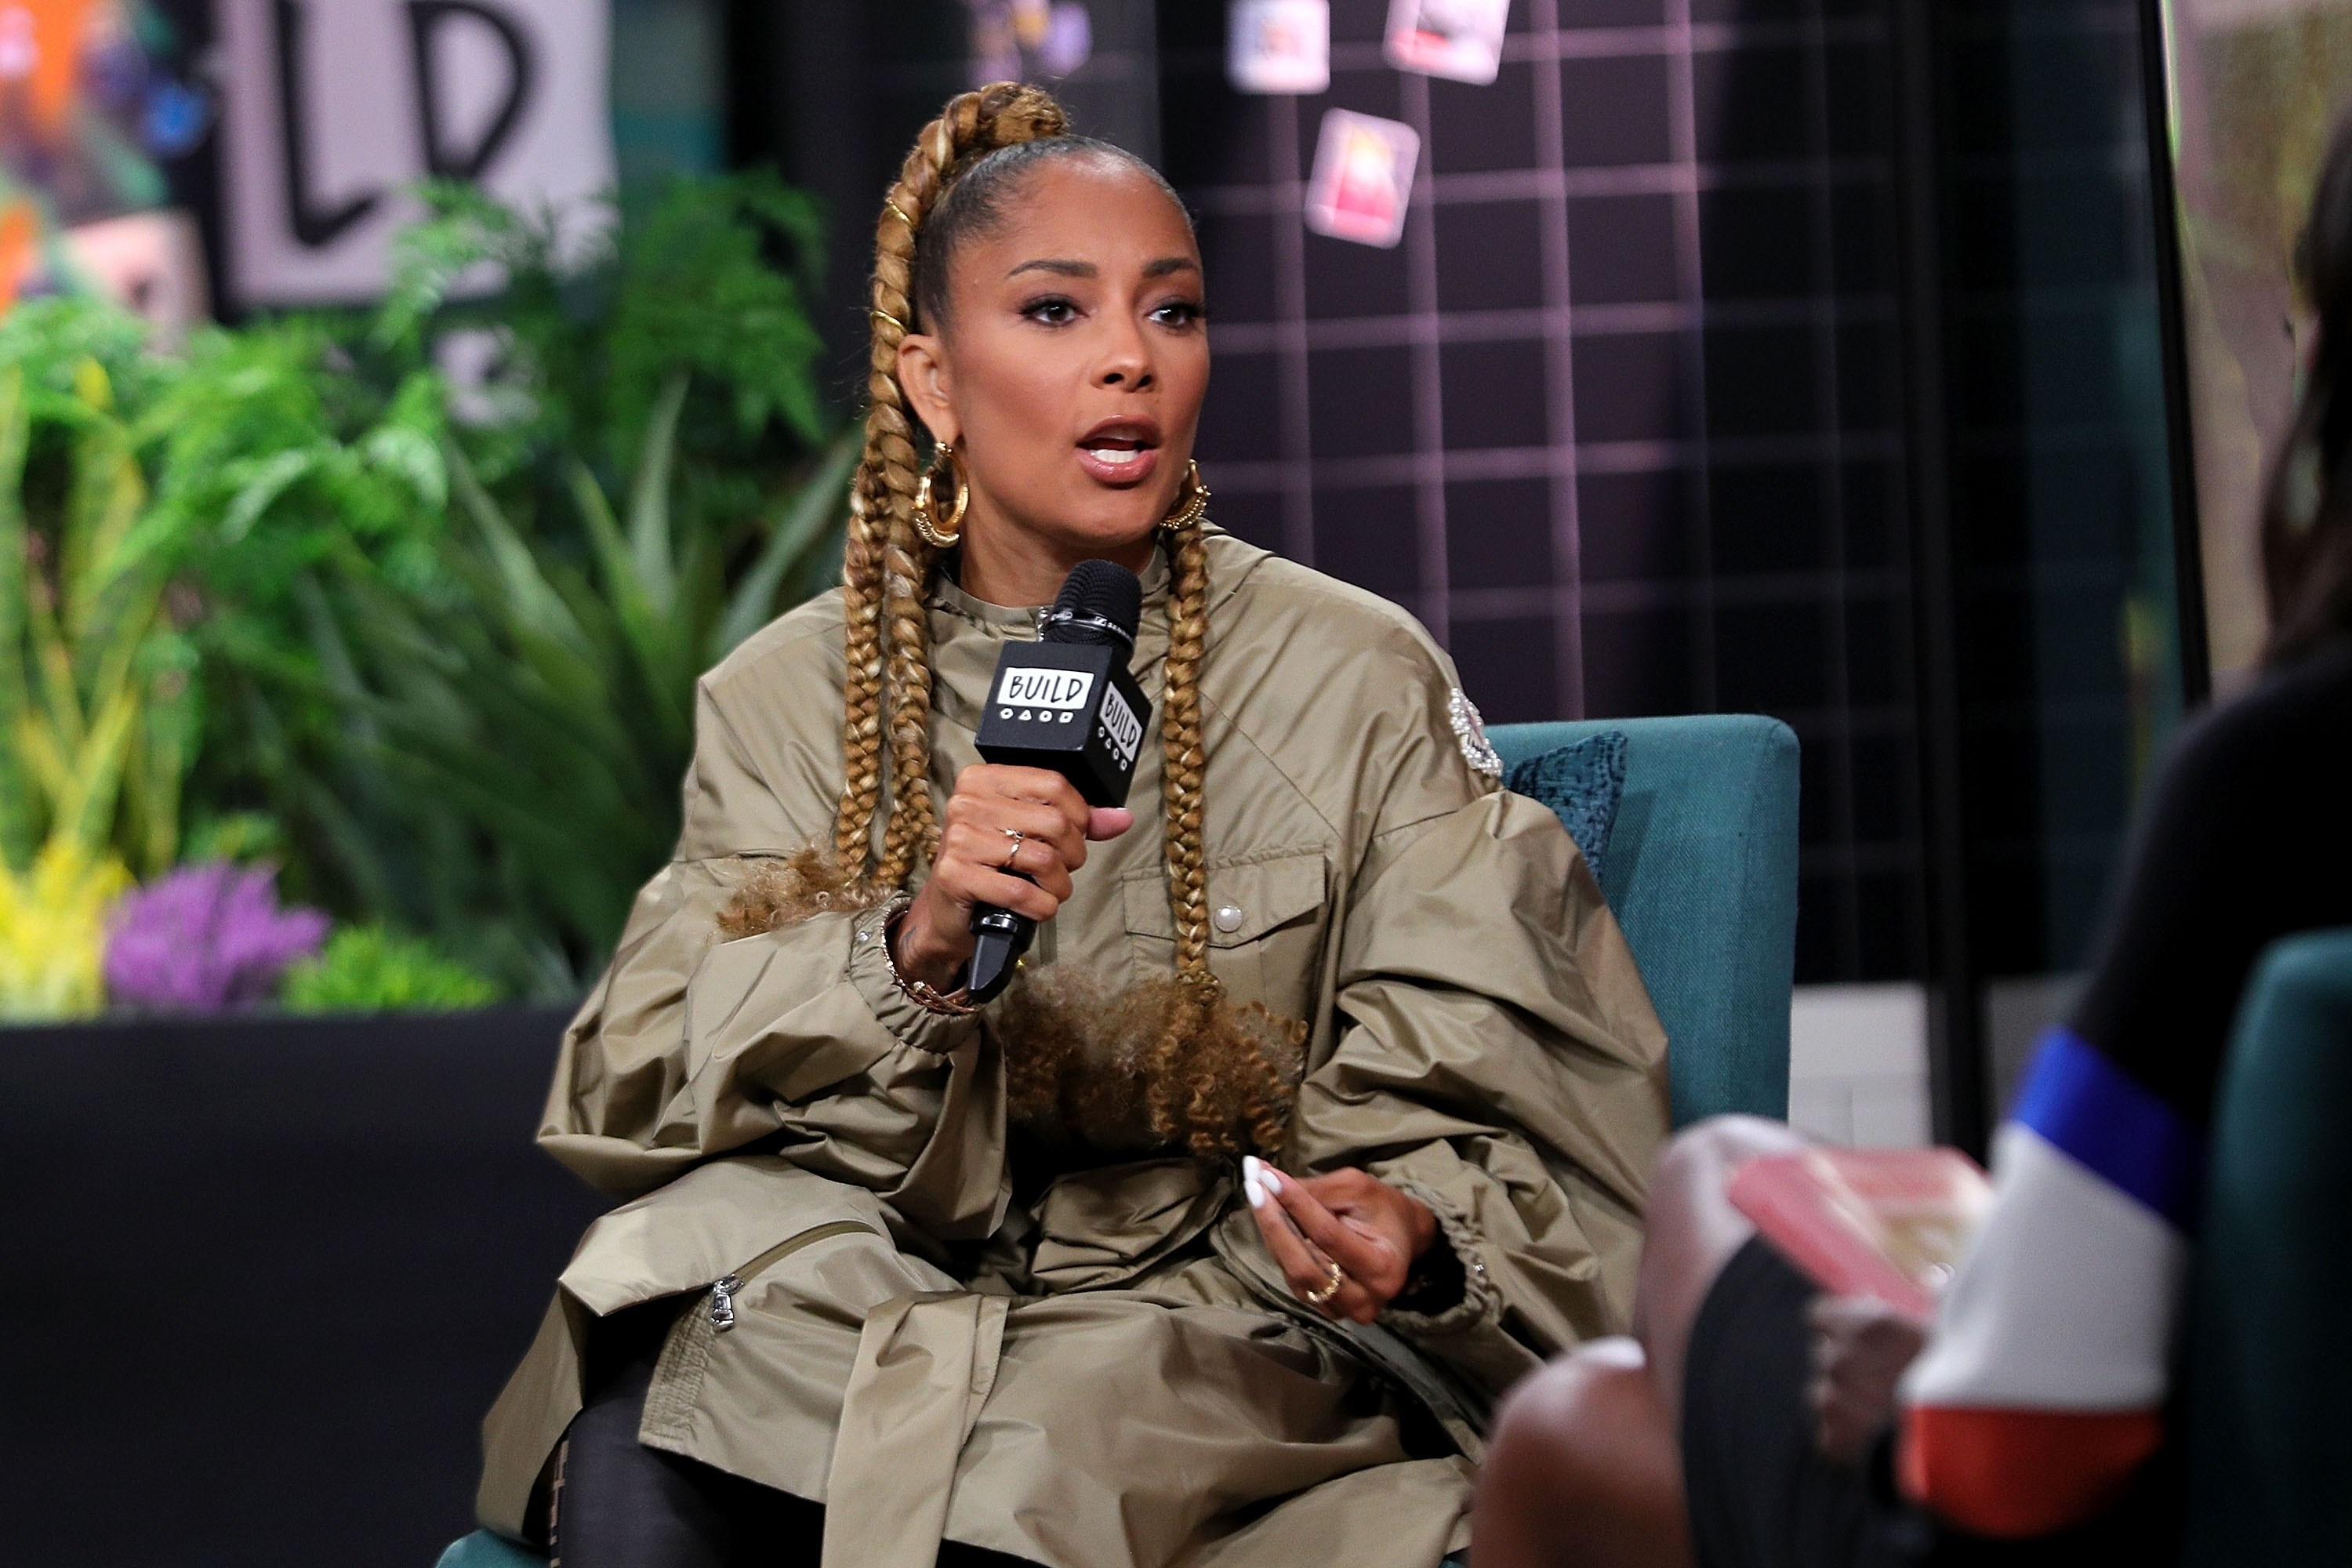 Amanda Seales speaking at an event